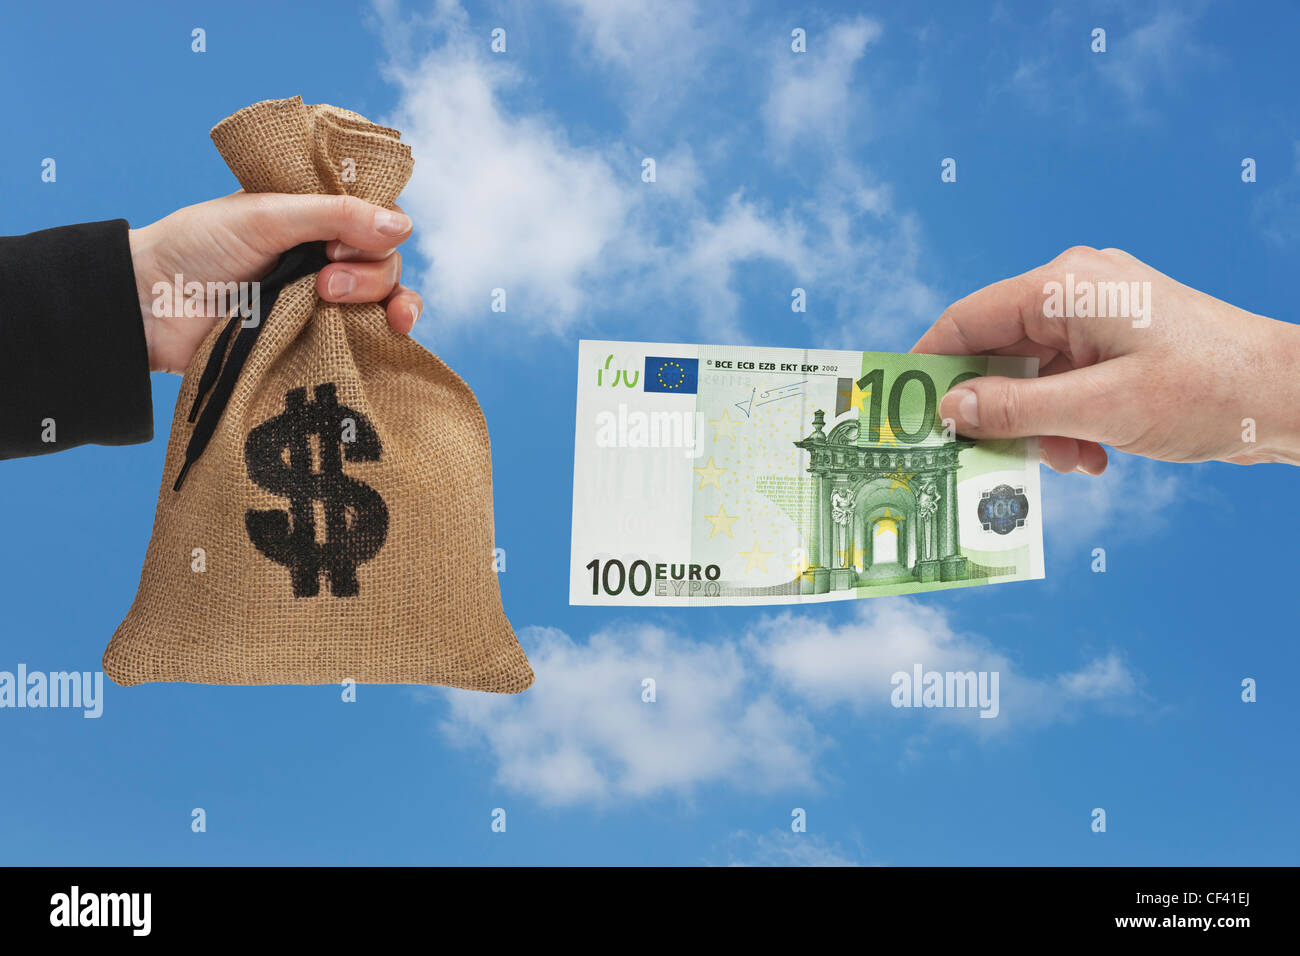 A 100 Euro bill is held in the hand. At the other side a money bag with a U.S. Dollar currency sign is held in the hand. Stock Photo